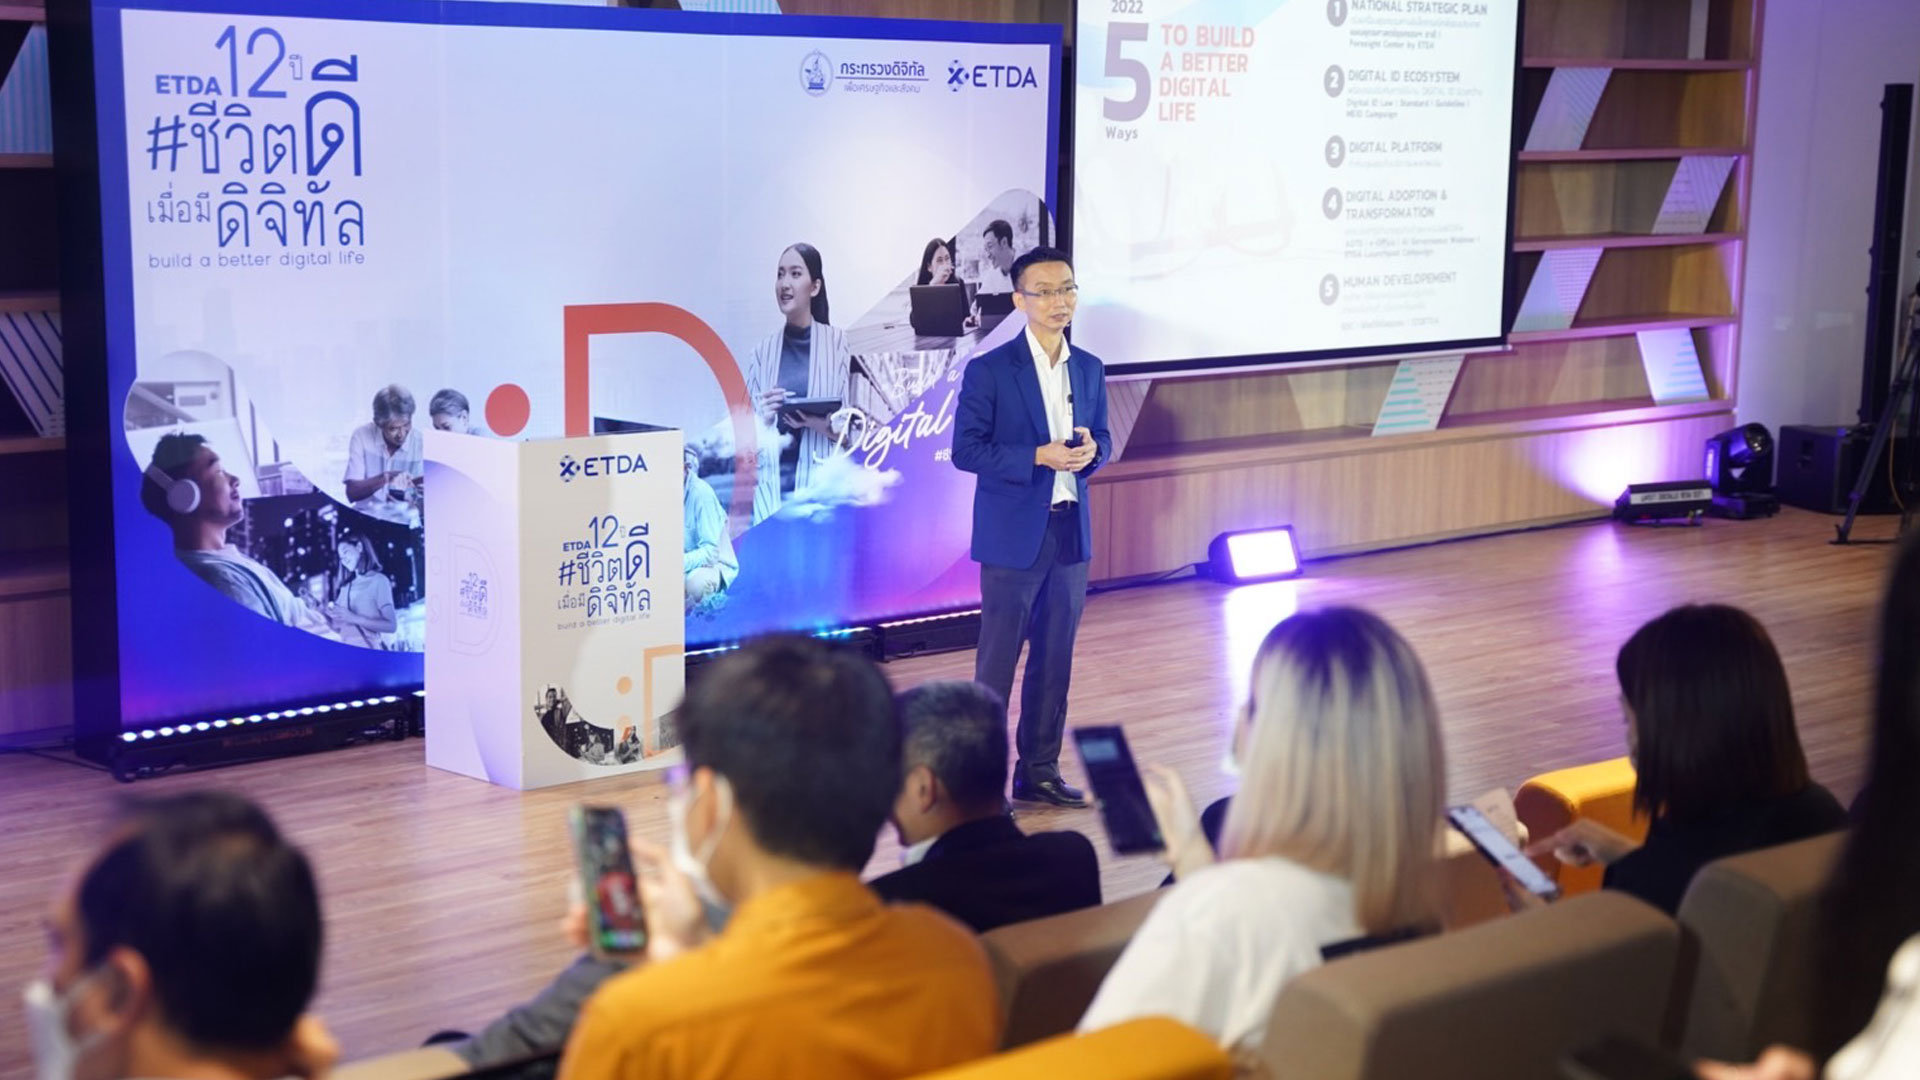 ETDA organizes the big event to highlight notable achievements over the year The agency says the year 2023 will be more proactive, closing loopholes, confronting challenges, and pushing Thais to live better than ever through digital technology